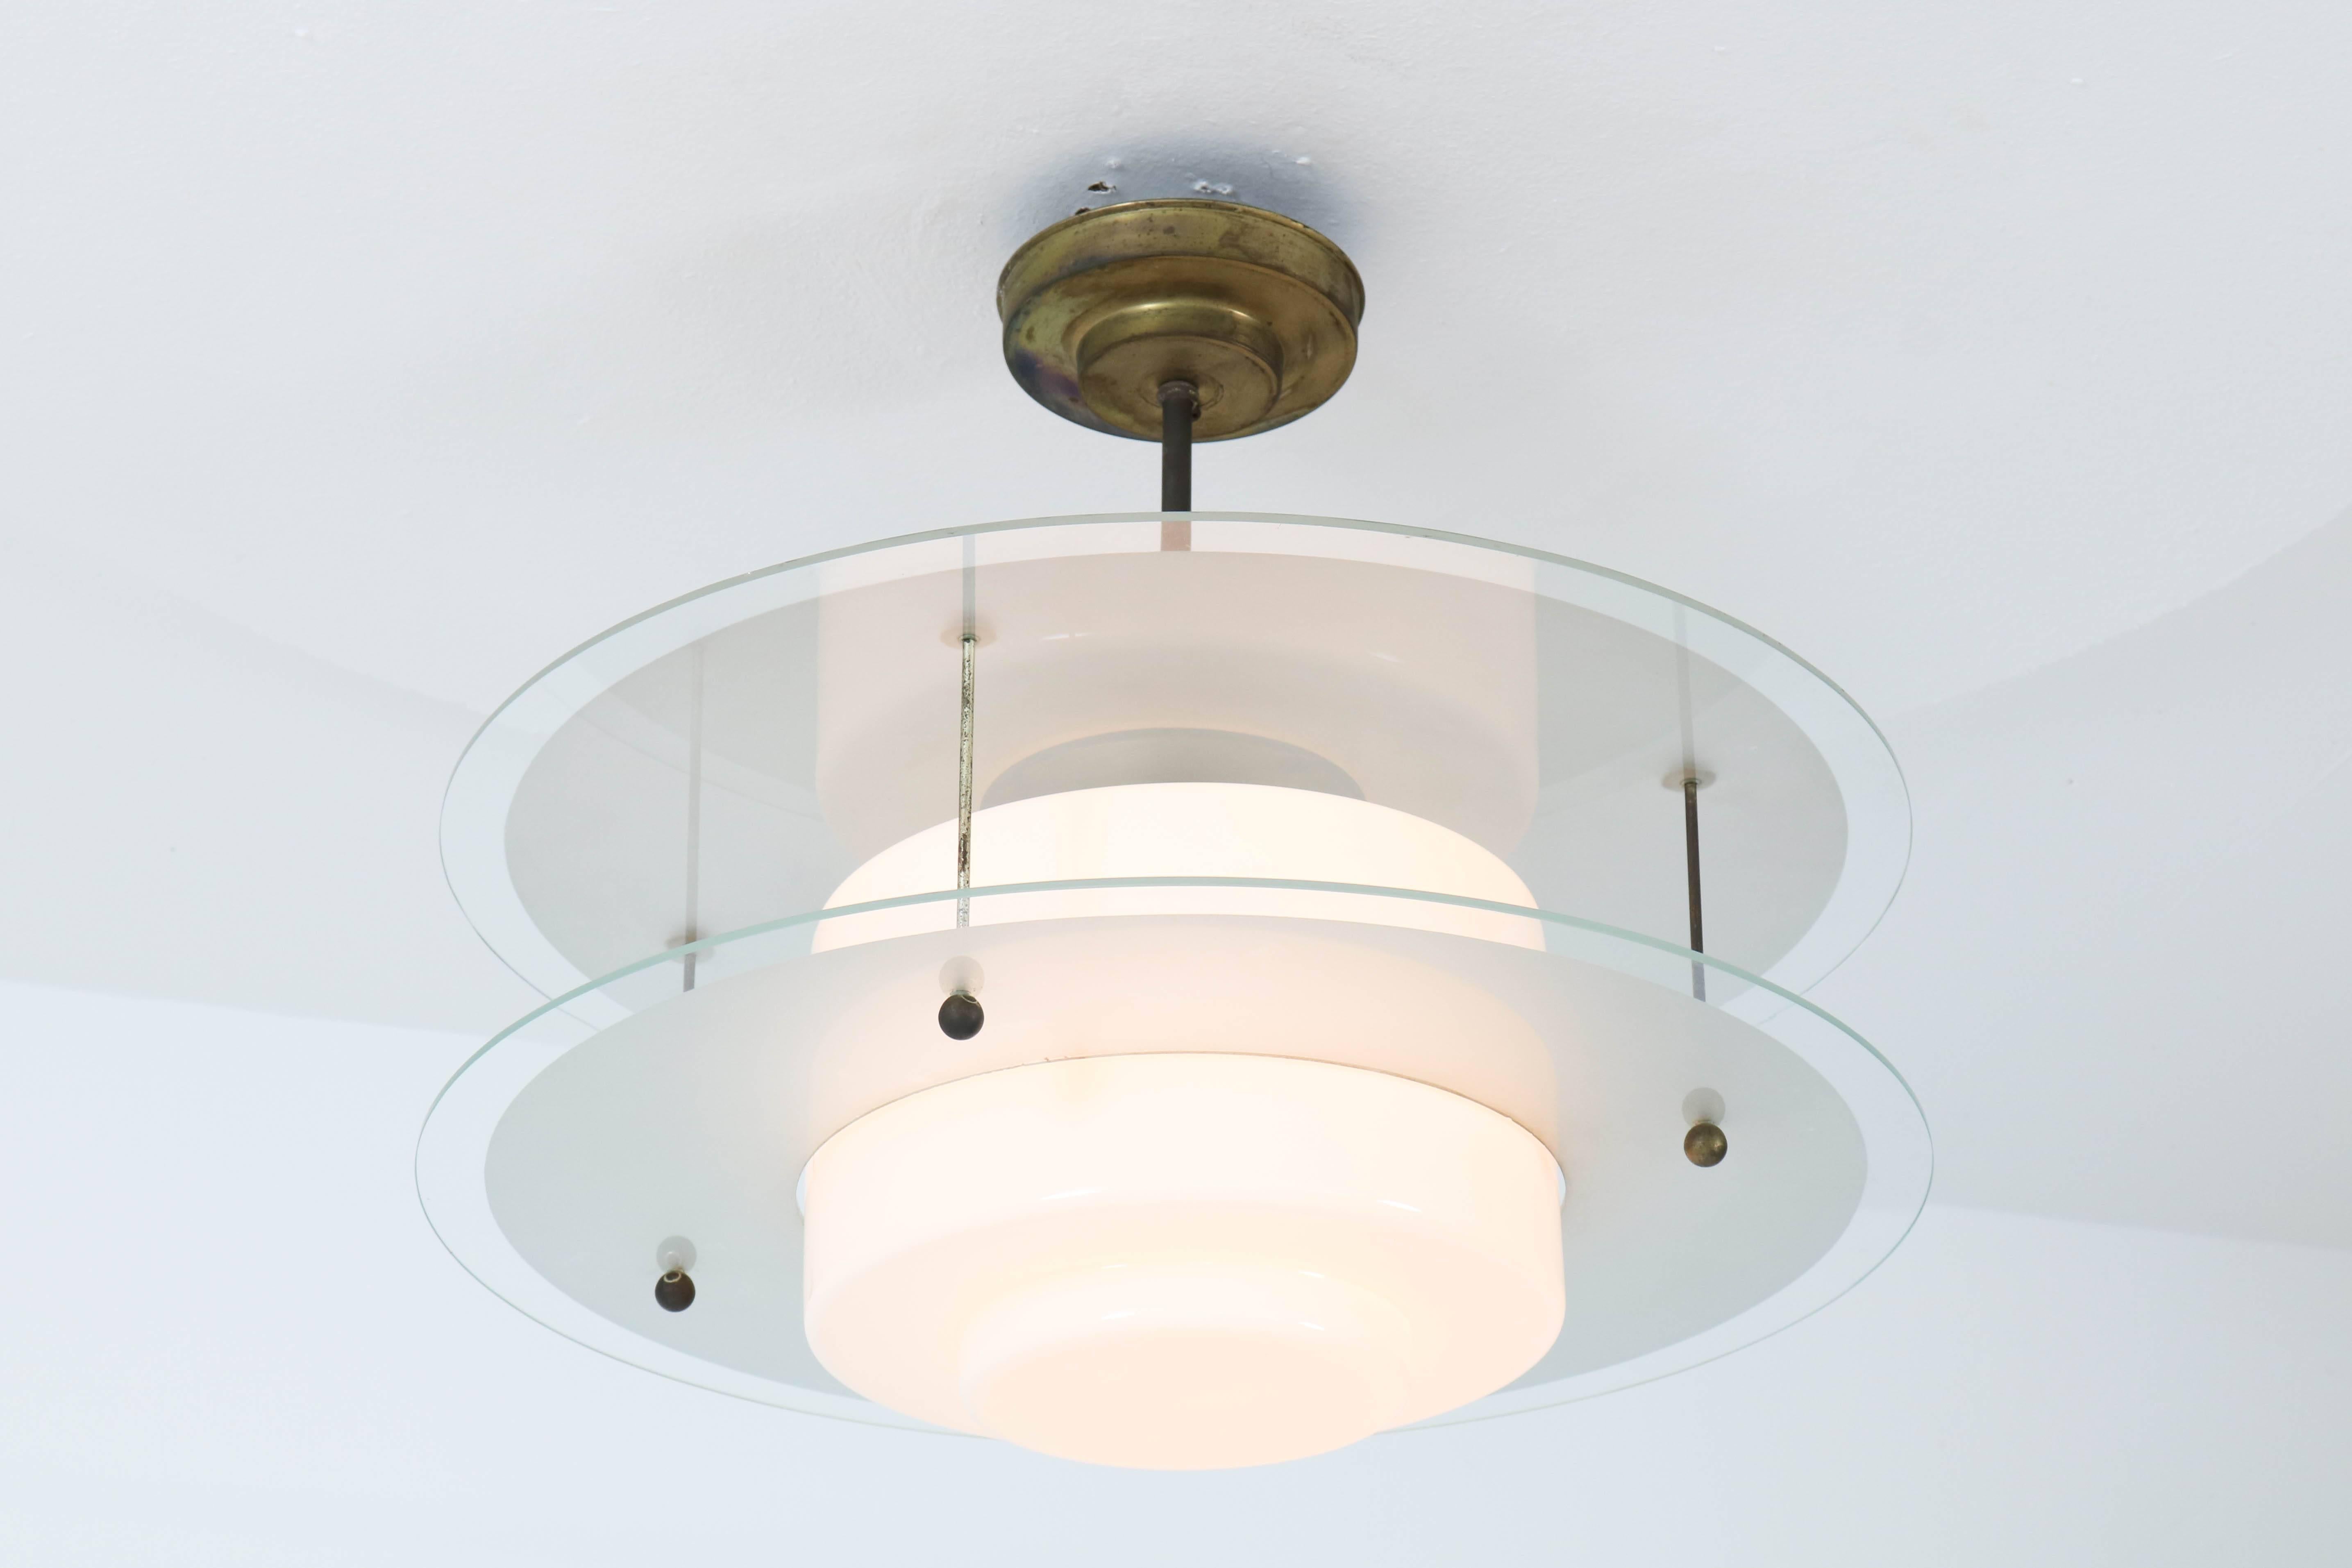 Rare Art Deco Gispen Giso pendant lamp by W.H. Gispen, 1931.
Striking Dutch Modernism design from the 1930s.
All parts of this stunning piece are 100% original.
In very good original condition with minor wear consistent with age and